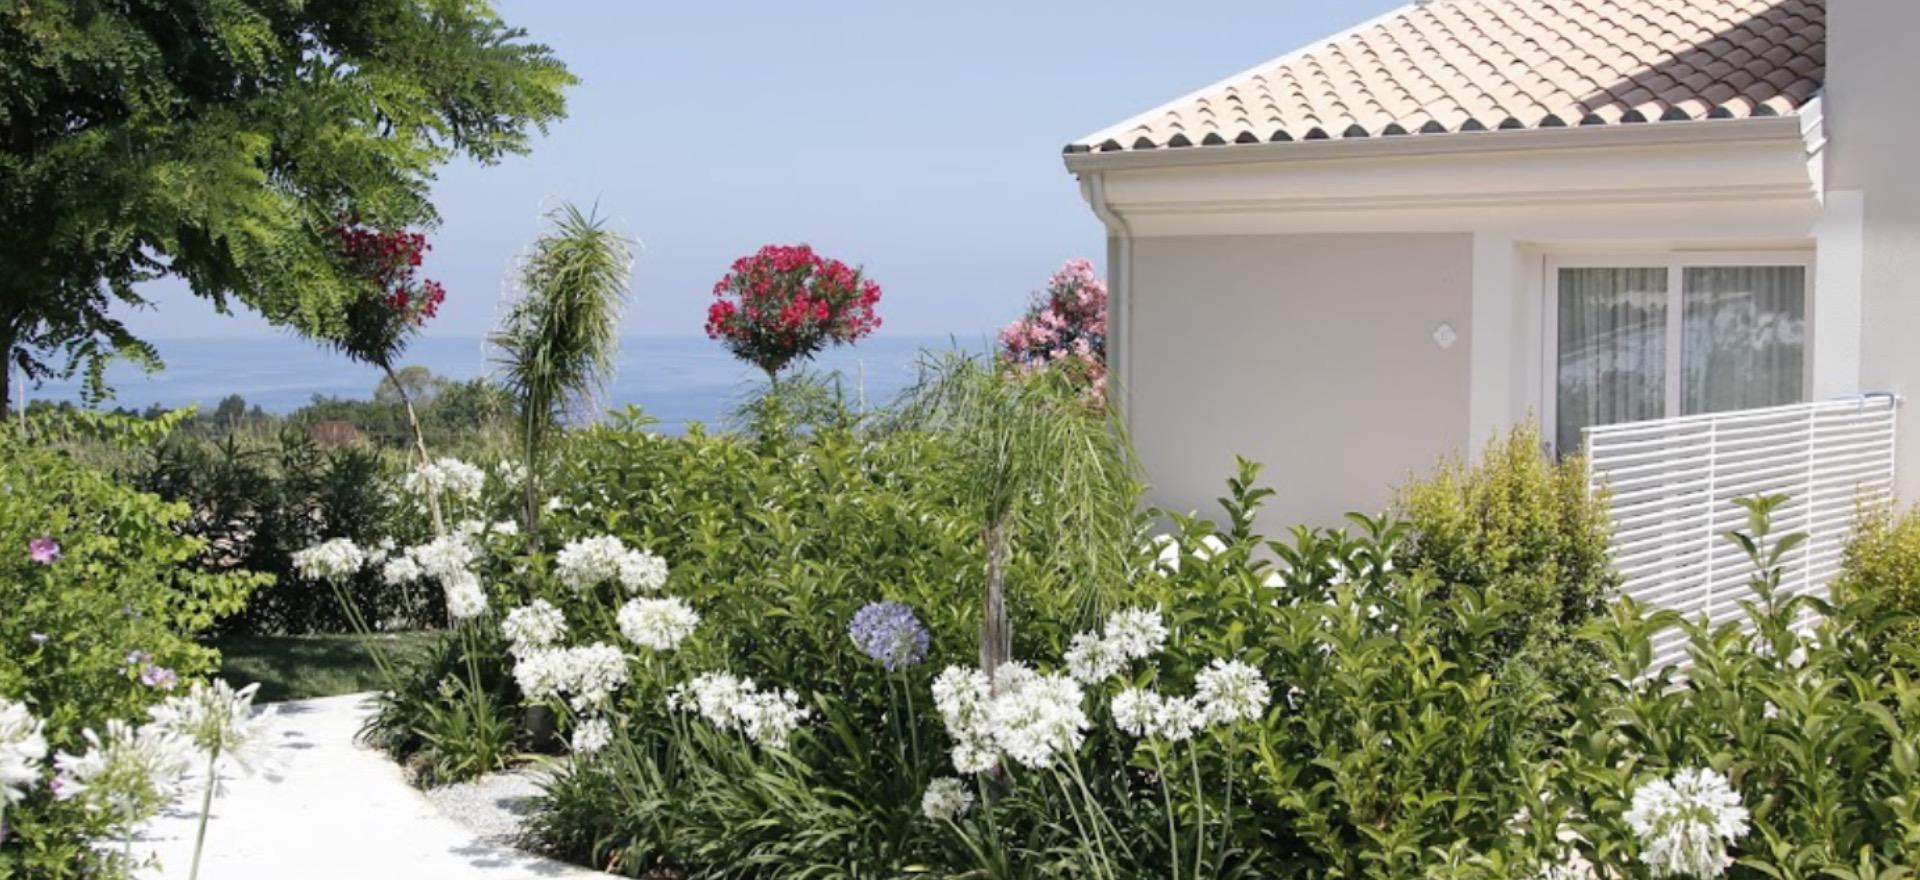 Agriturismo Calabria Beautiful B&B in Calabria not far from the beach